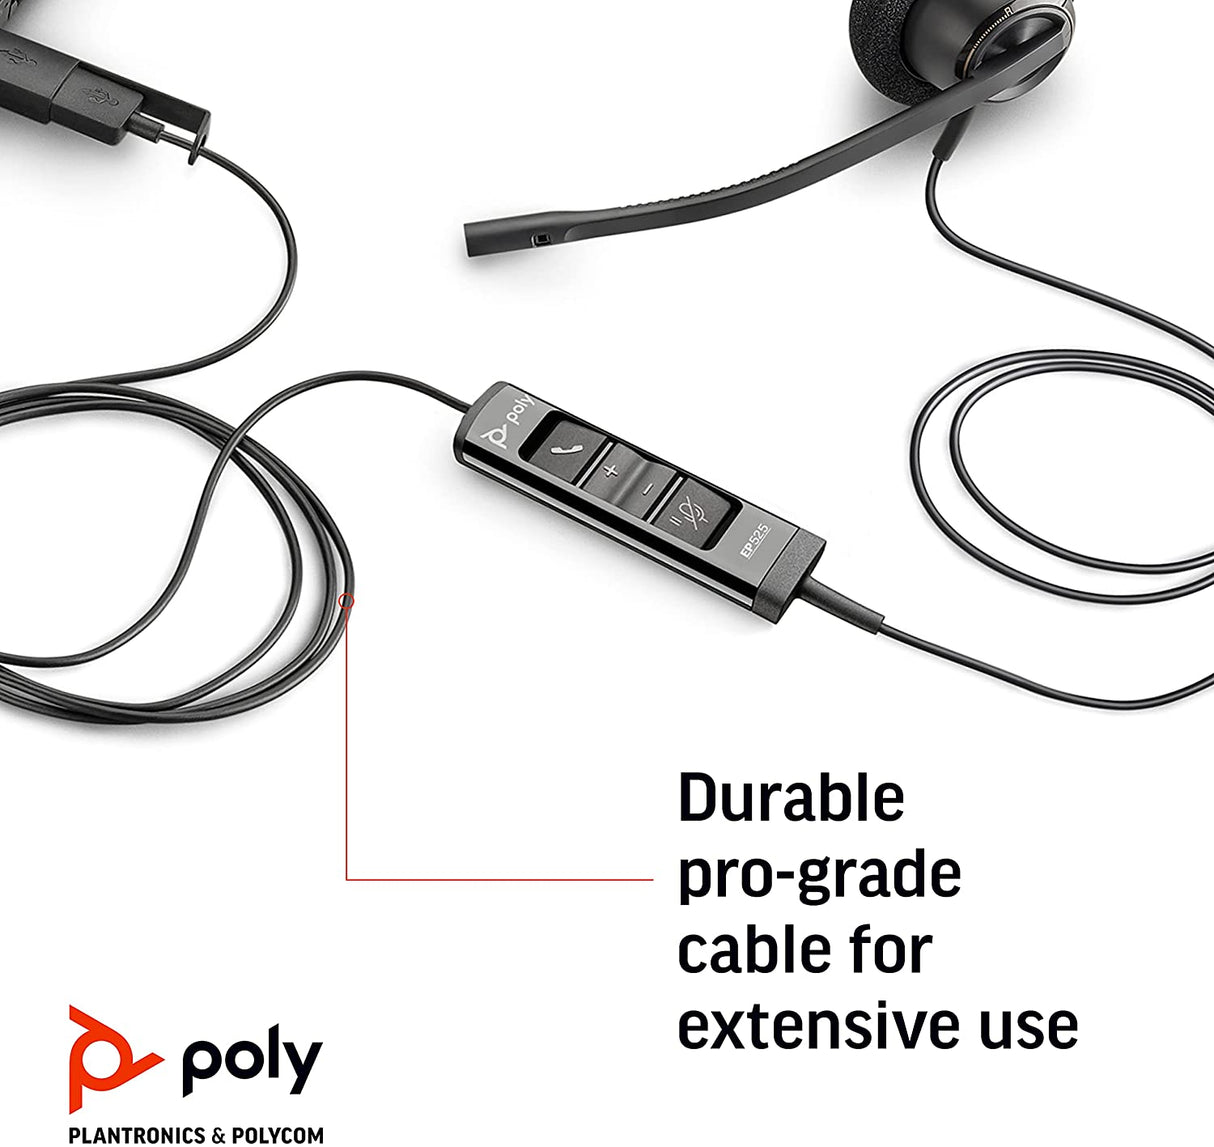 Poly - EncorePro 525 USB-A and USB-C USB Headset (Plantronics) - Acoustic Hearing Protection - Hold &amp; Call Answer Buttons - Dual Ear Wearing Style Standard Version Over-the-Head Dual Ear